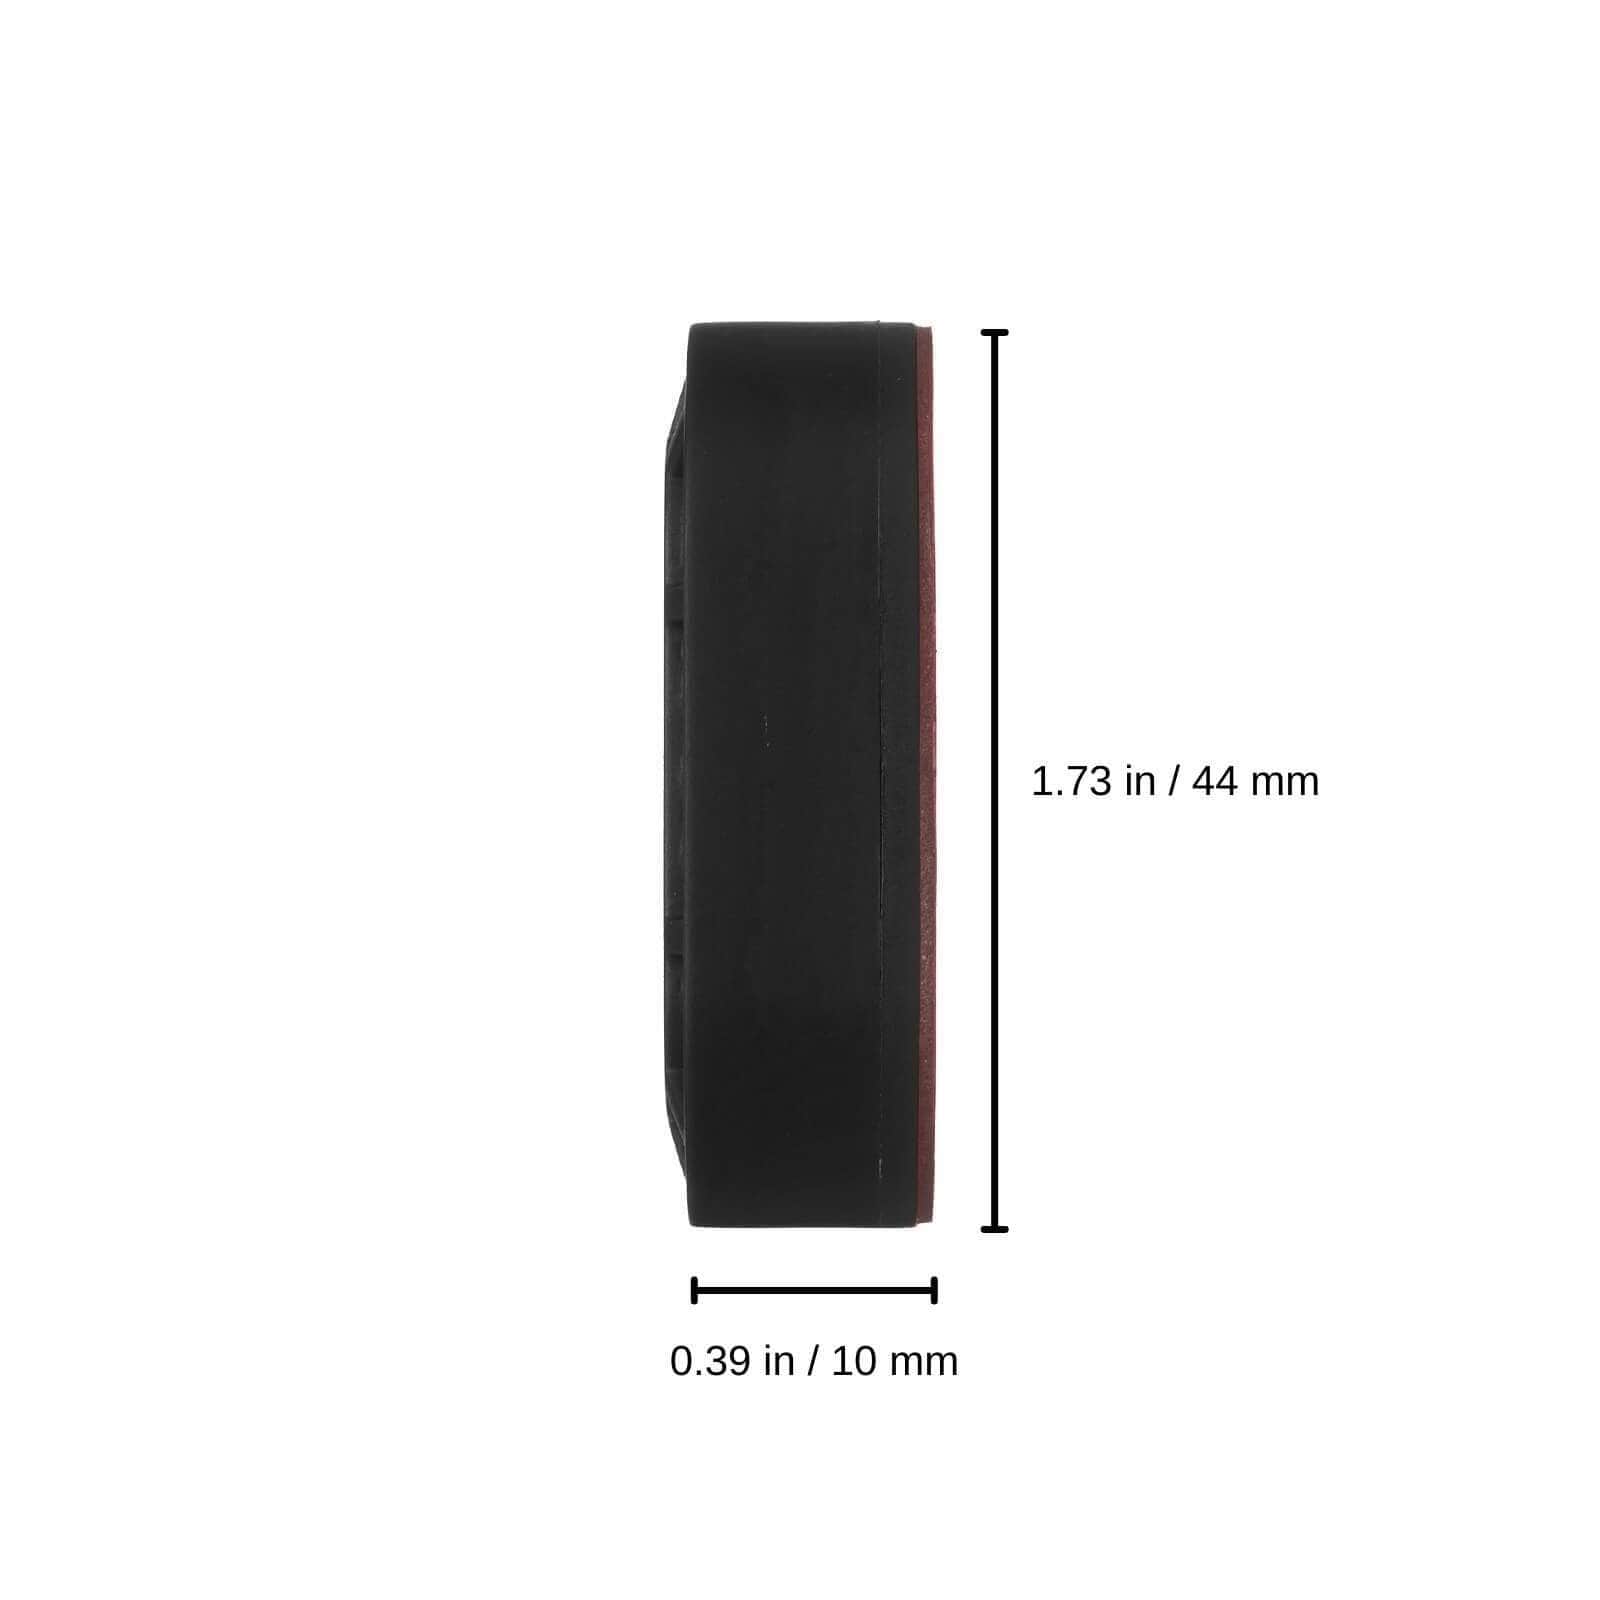 0.39 inches / 10 mm x 1.73 in / 44 mm color::Black